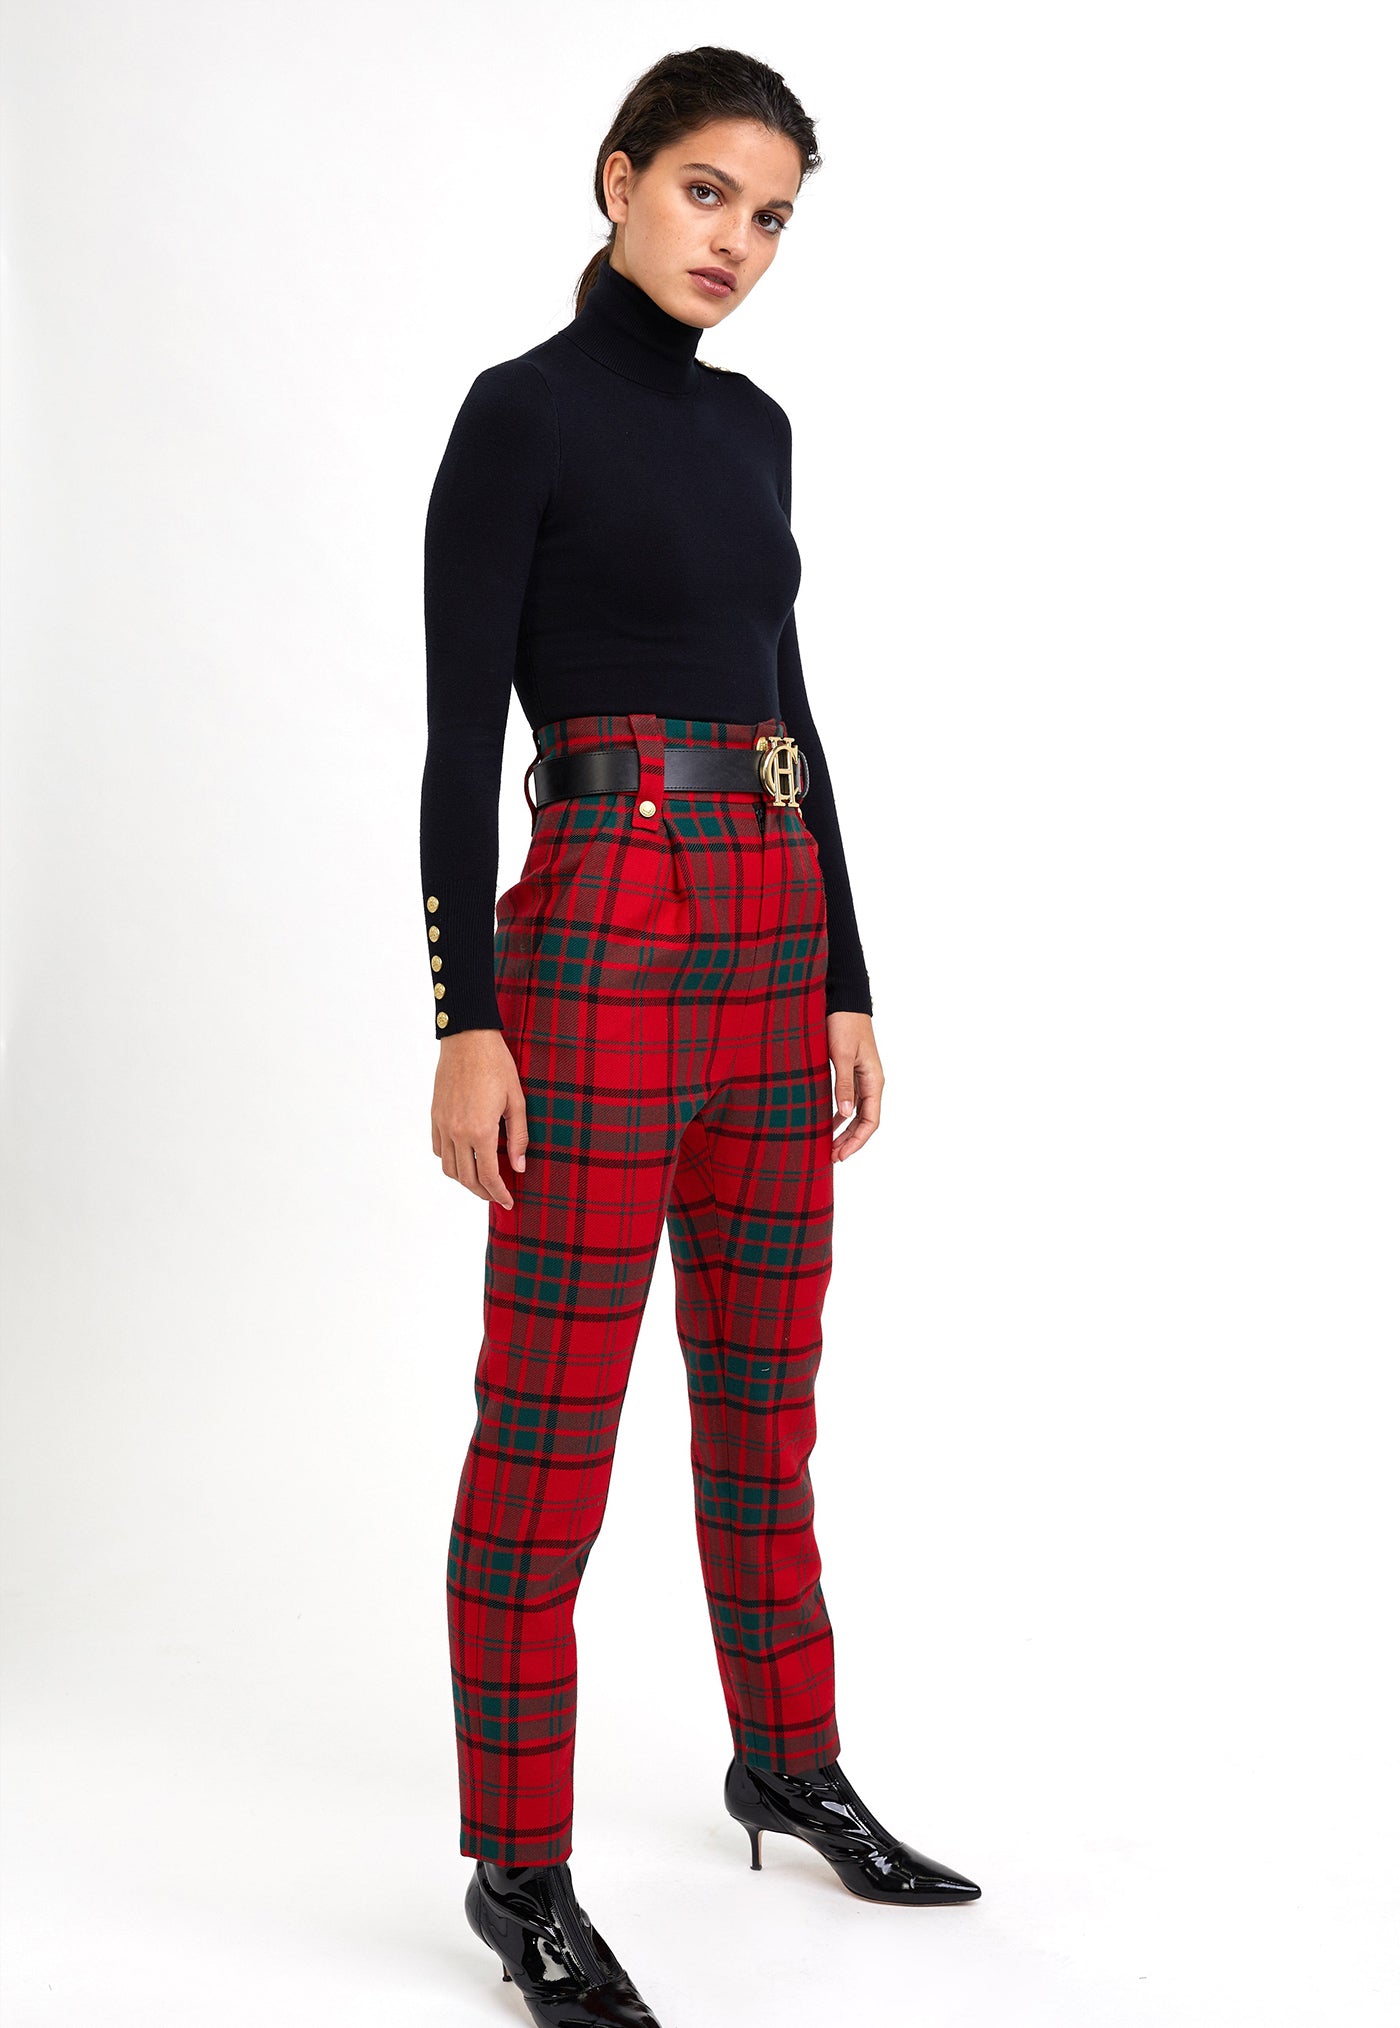 High Waisted Peg Trouser - Red Tartan sold by Angel Divine